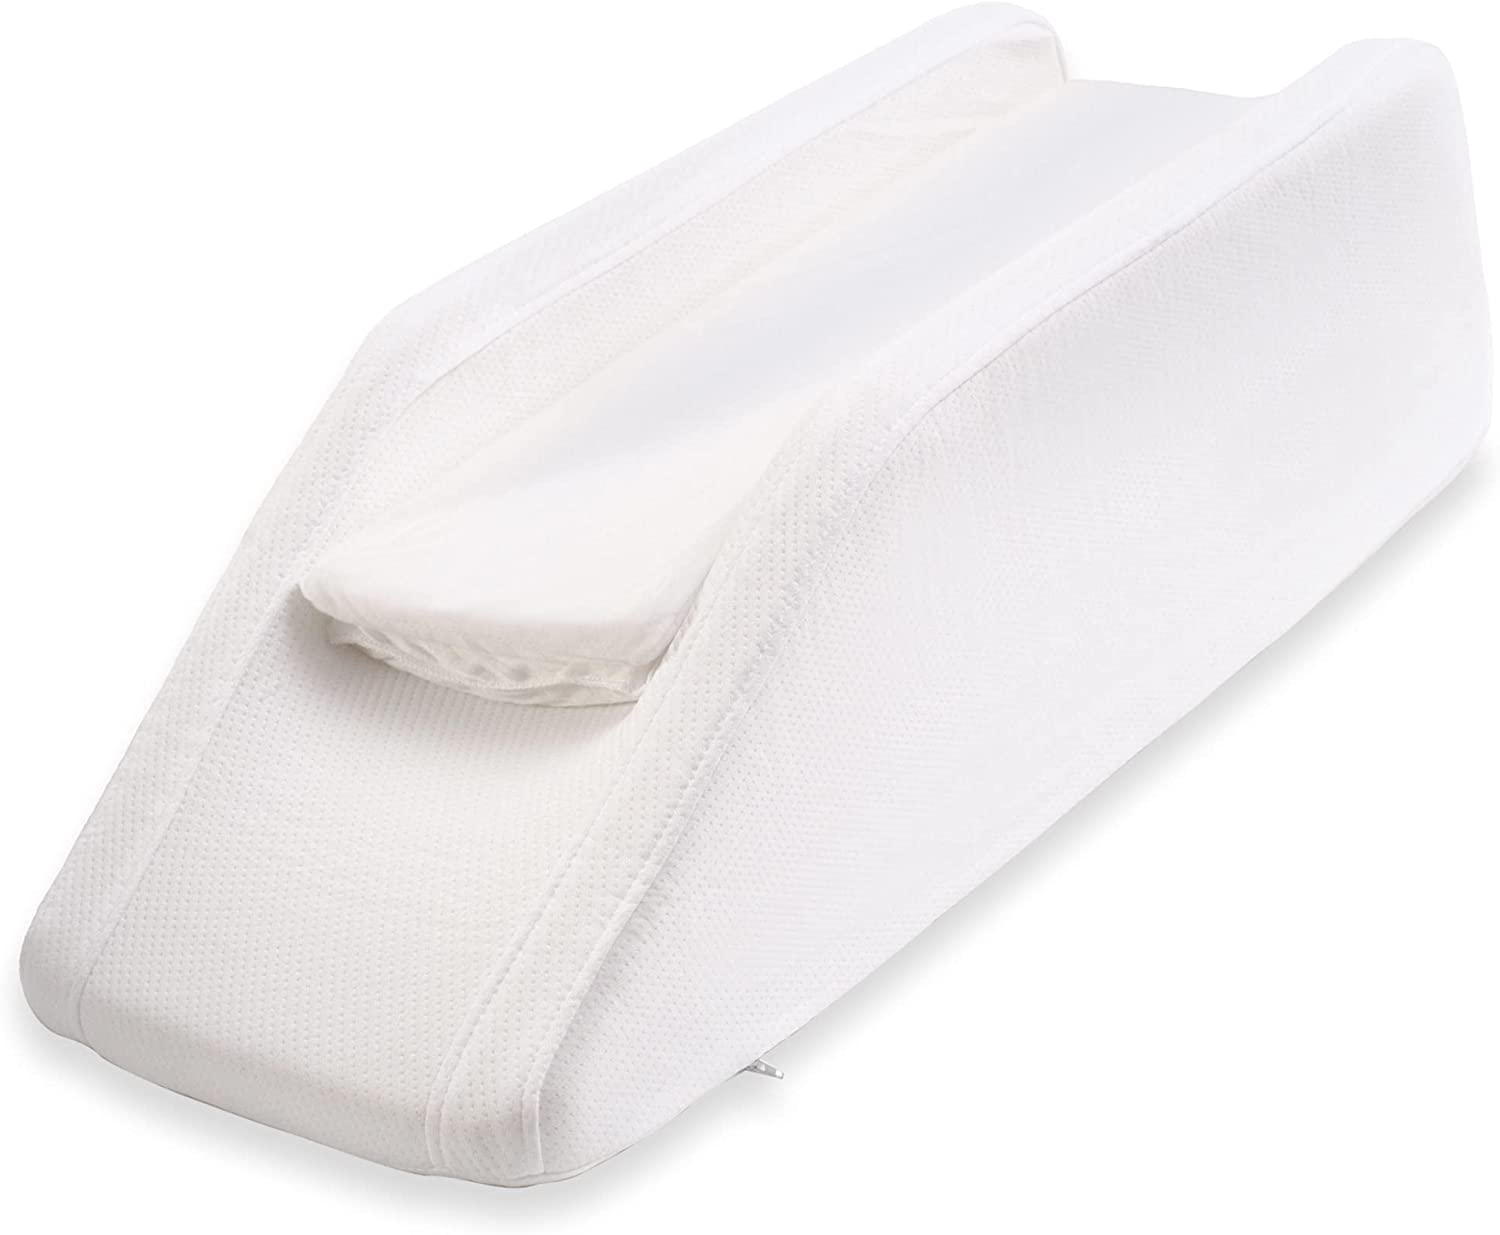 UBBCARE Leg Elevation Pillow for Leg/Knee Surgery Recovery, Memory Foam Leg  Support Pillow with Washable Cover, White